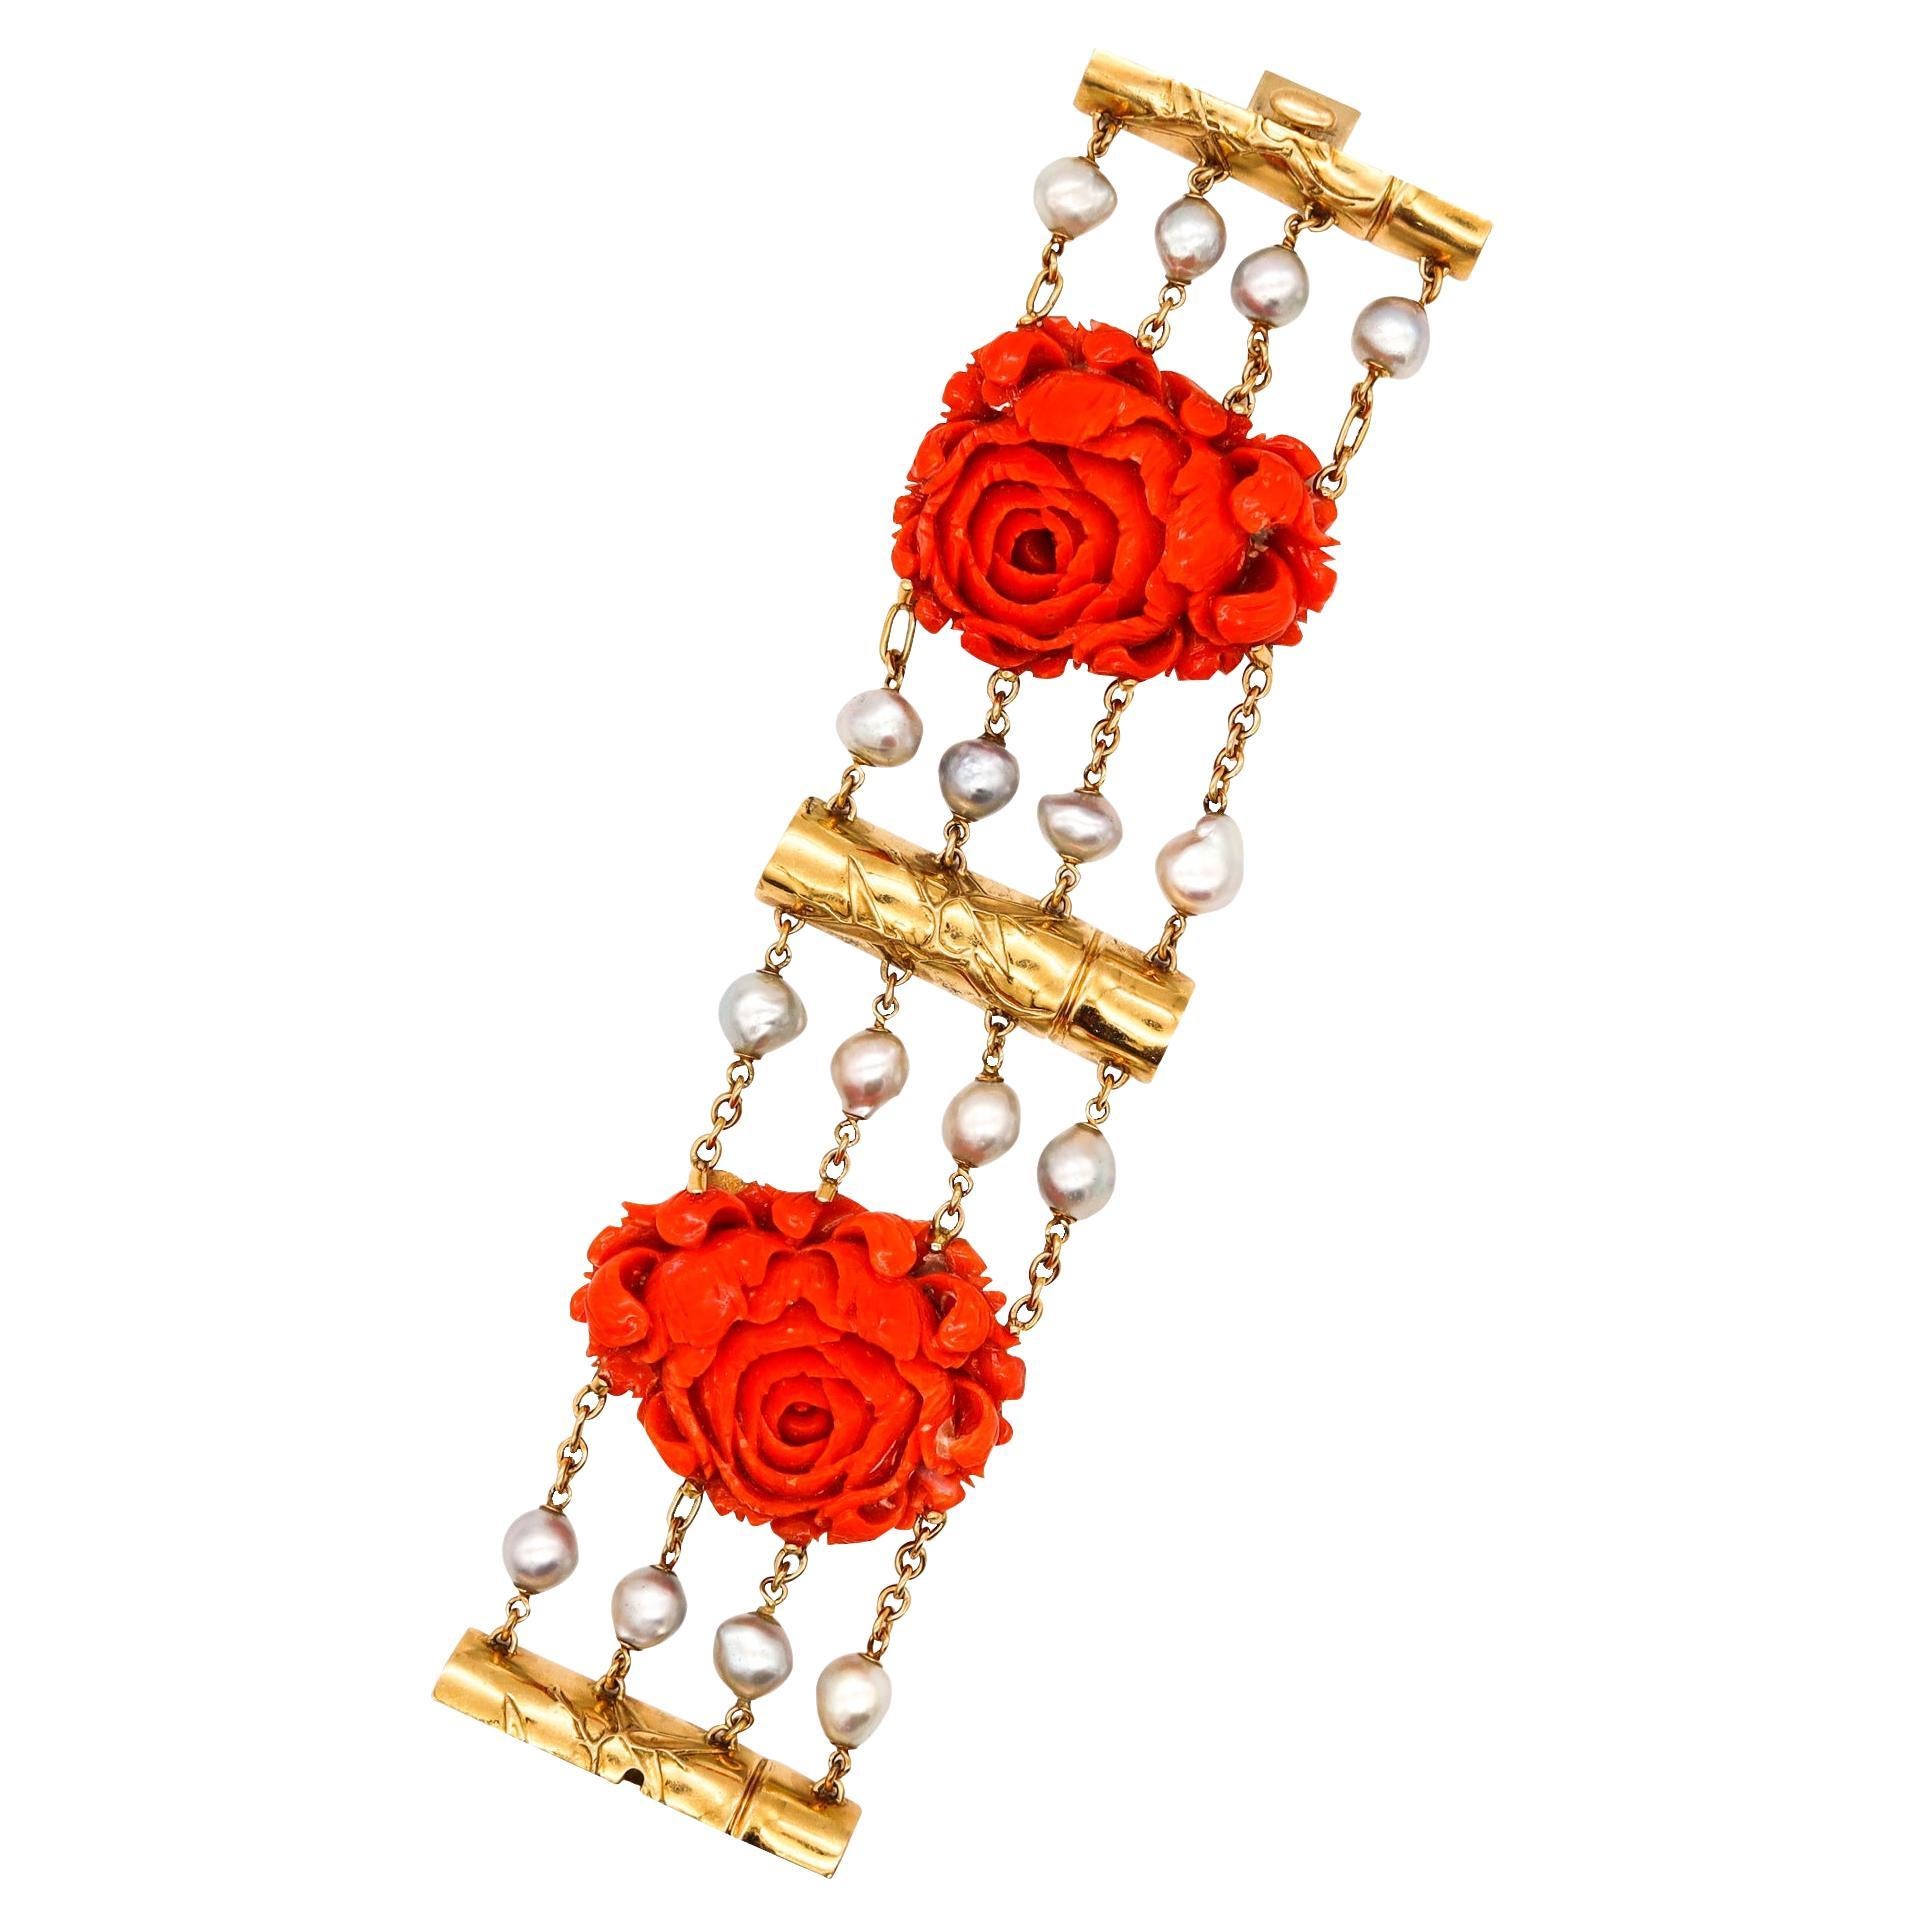 Seaman Schepps 1970 New York Rare Bracelet in 18Kt Gold with Red Coral and Pearl For Sale